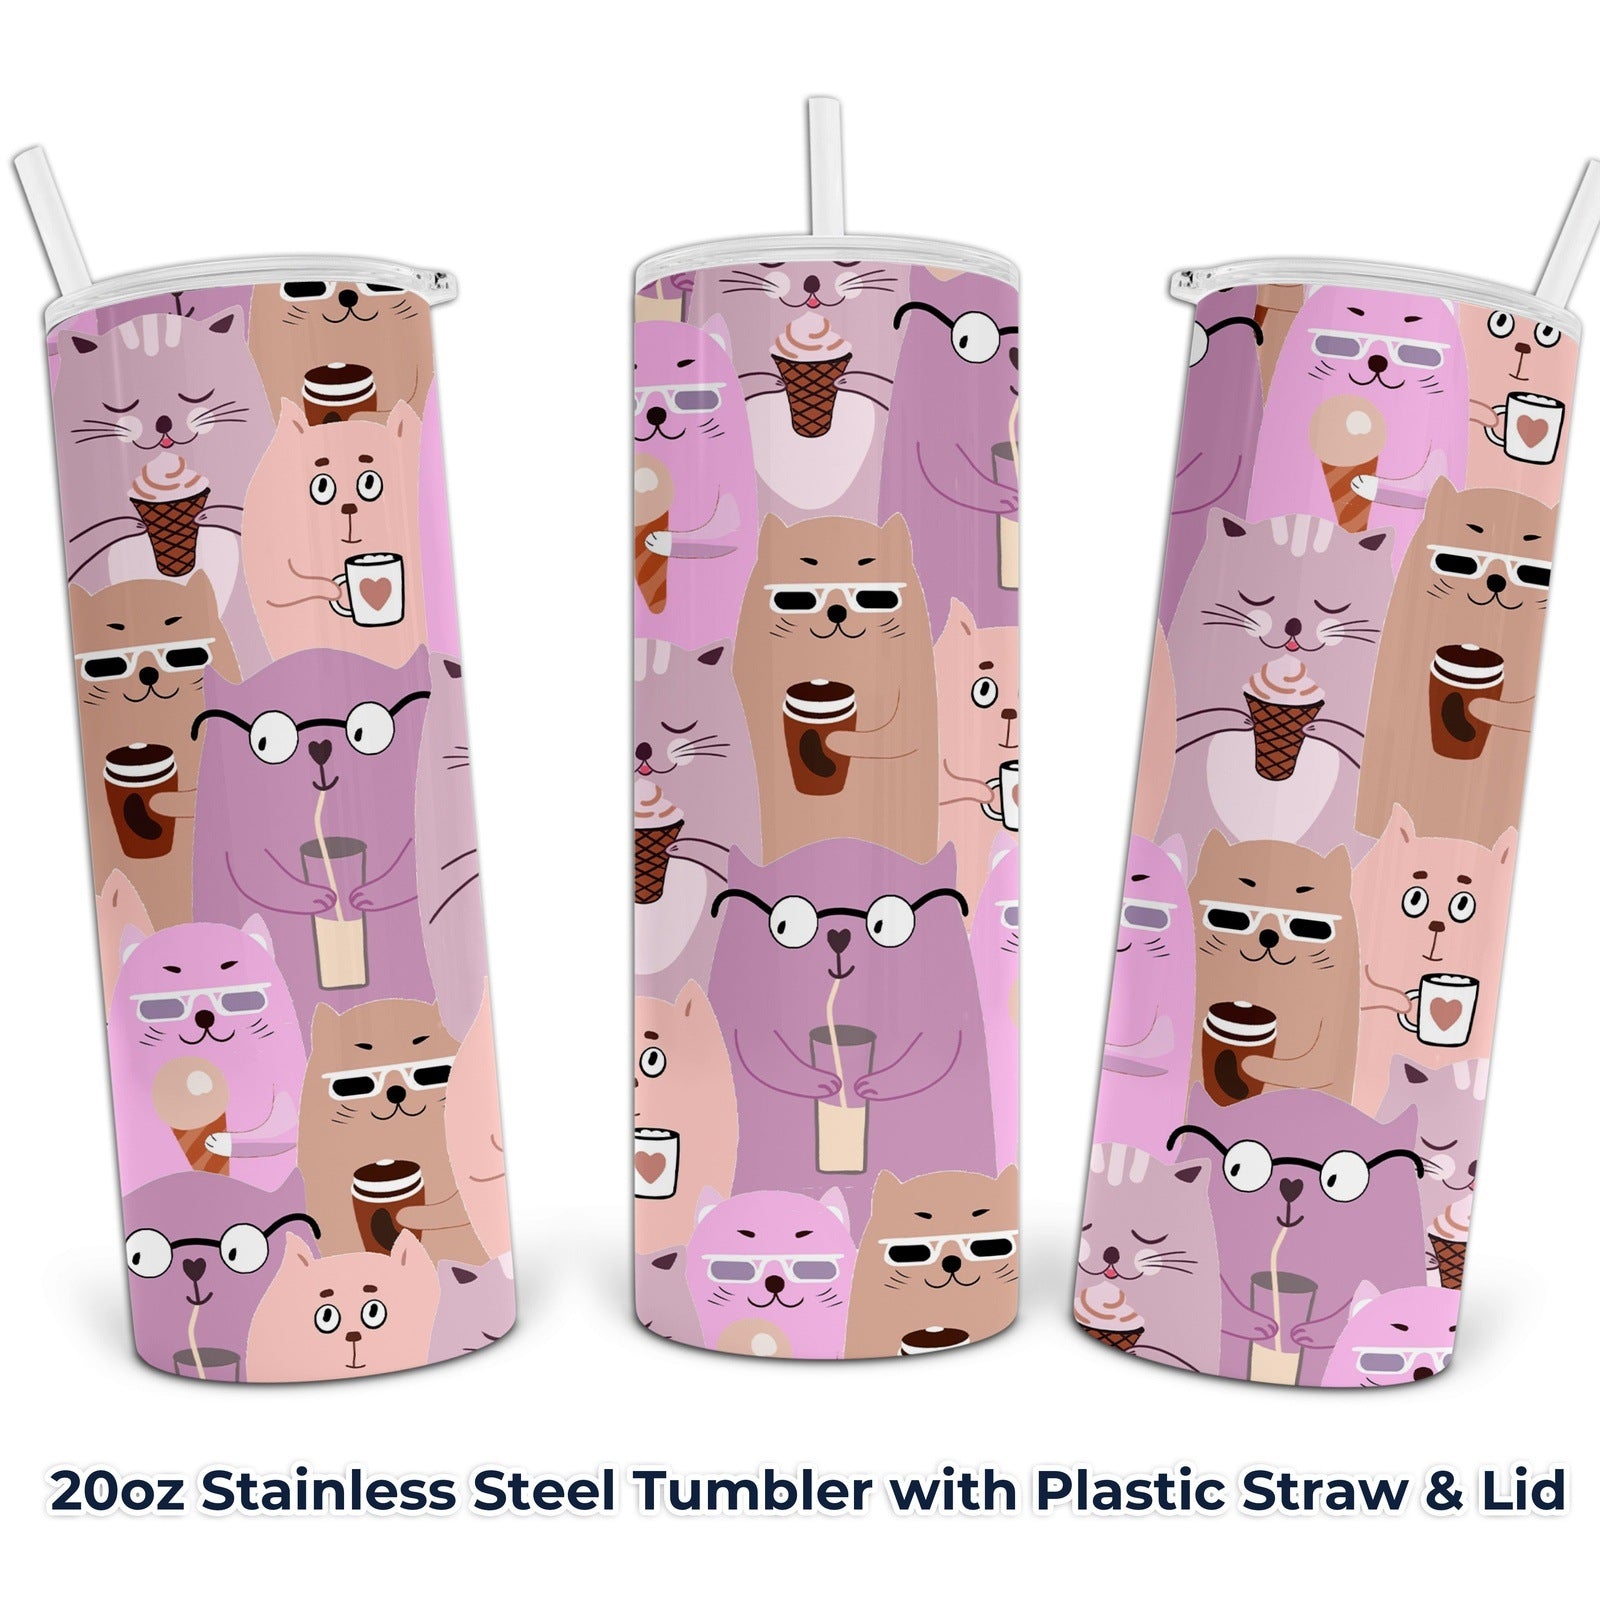 Purple Kitty Cat Collage Design - 20oz Stainless Steel Tumbler with Lid and Straw